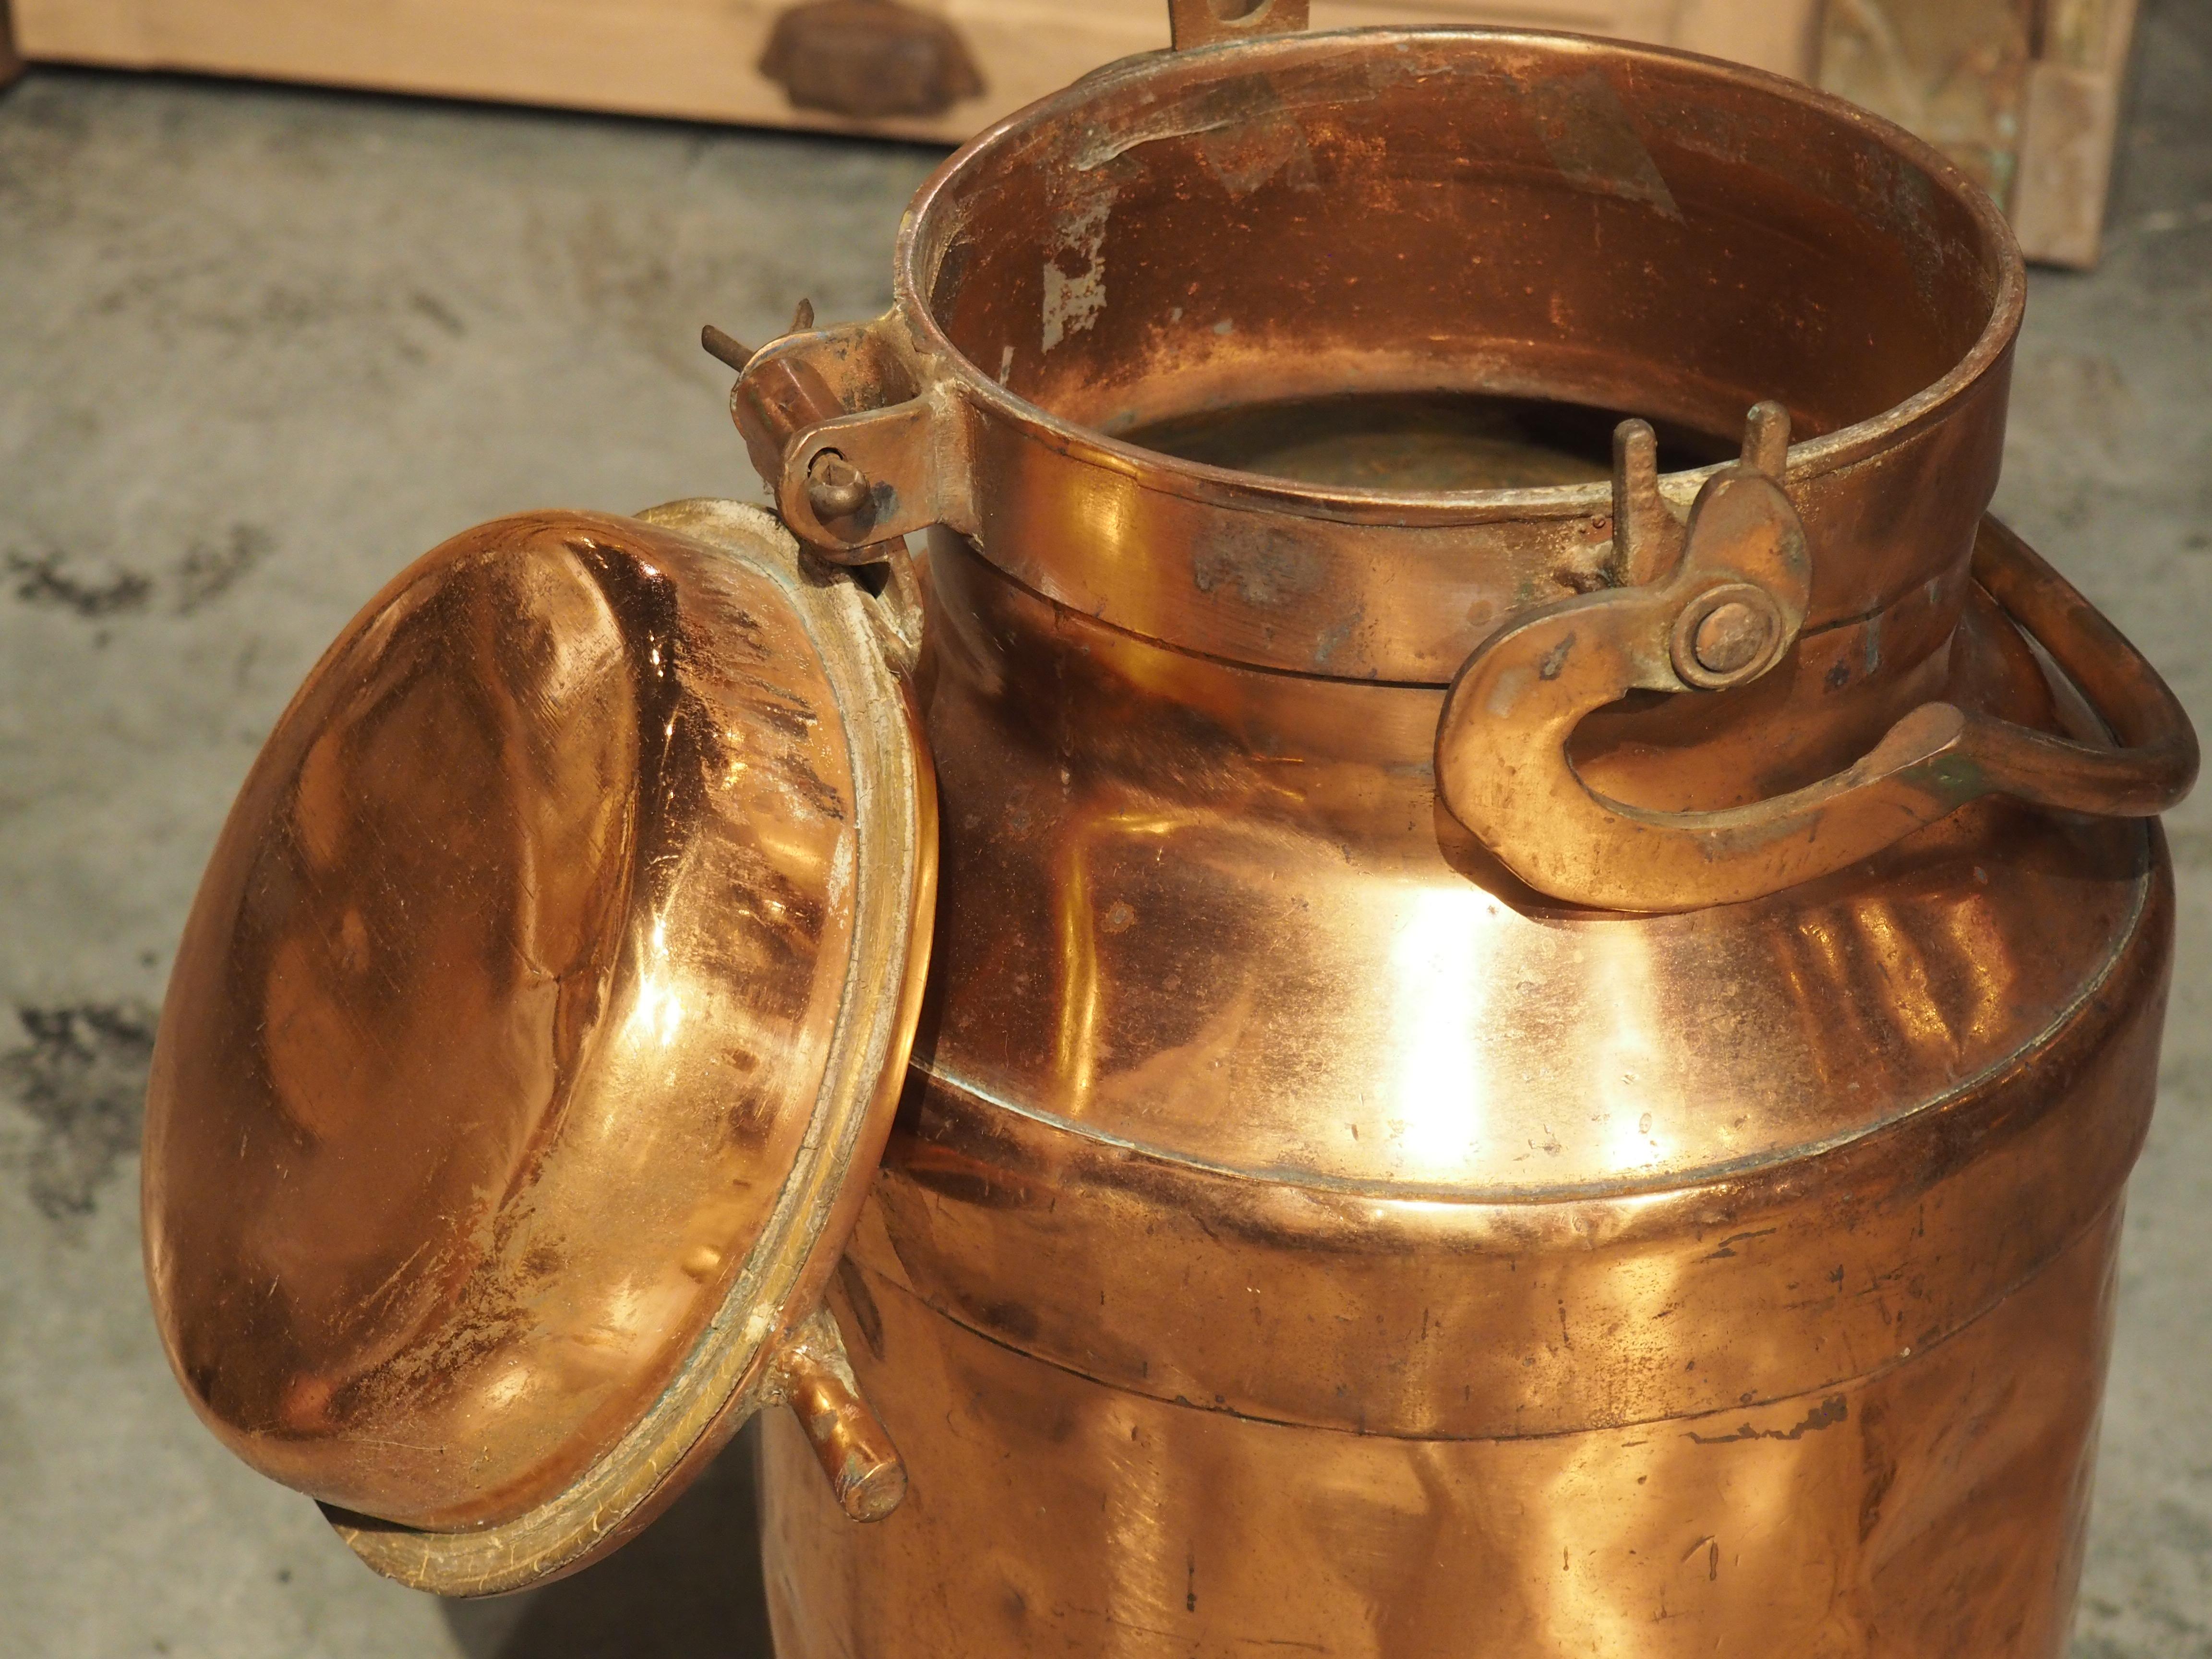 Before the advent of refrigerated trucks, metal milk containers, such as this French polished copper from circa 1890, would be used by dairy farmers to transport milk to customers. The farmers would load several of these containers with fresh milk,